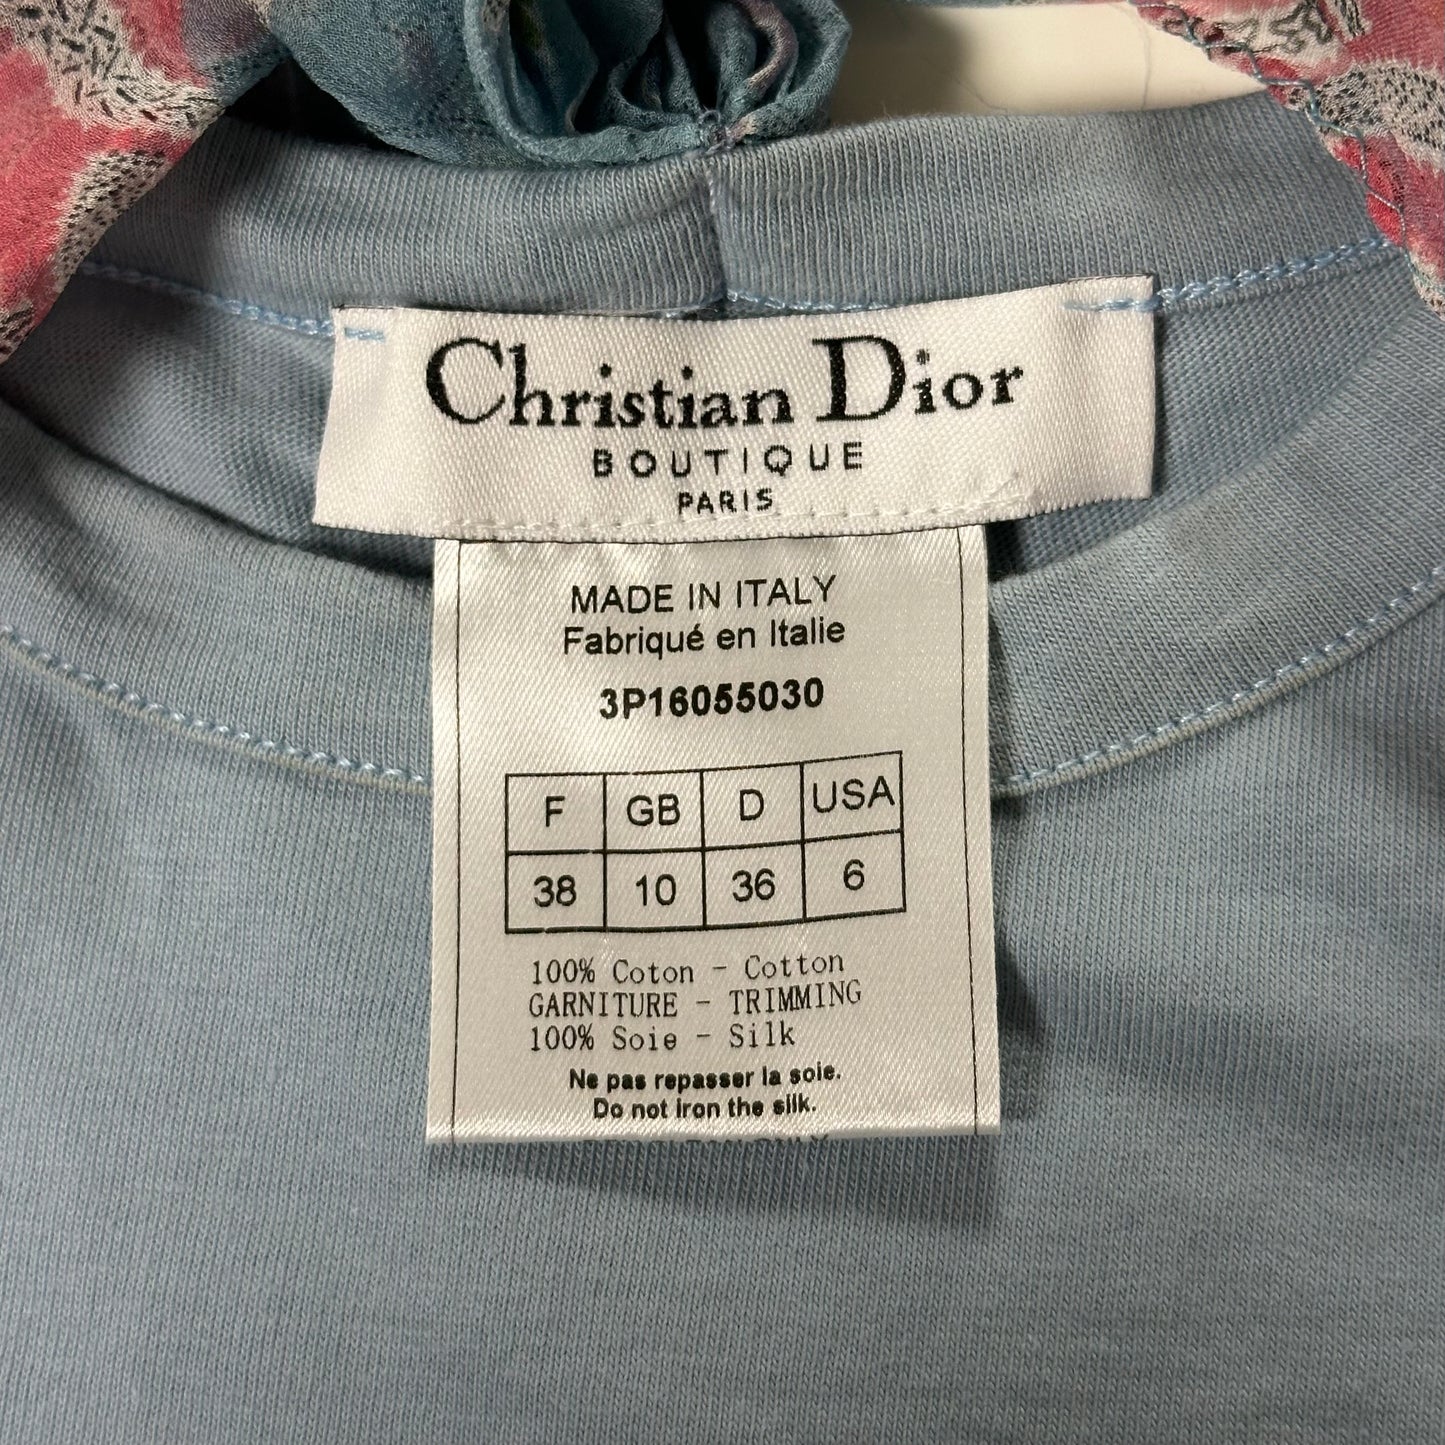 CHRISTIAN DIOR Spring Summer 2003 Tank Top with Floral Print Scarf